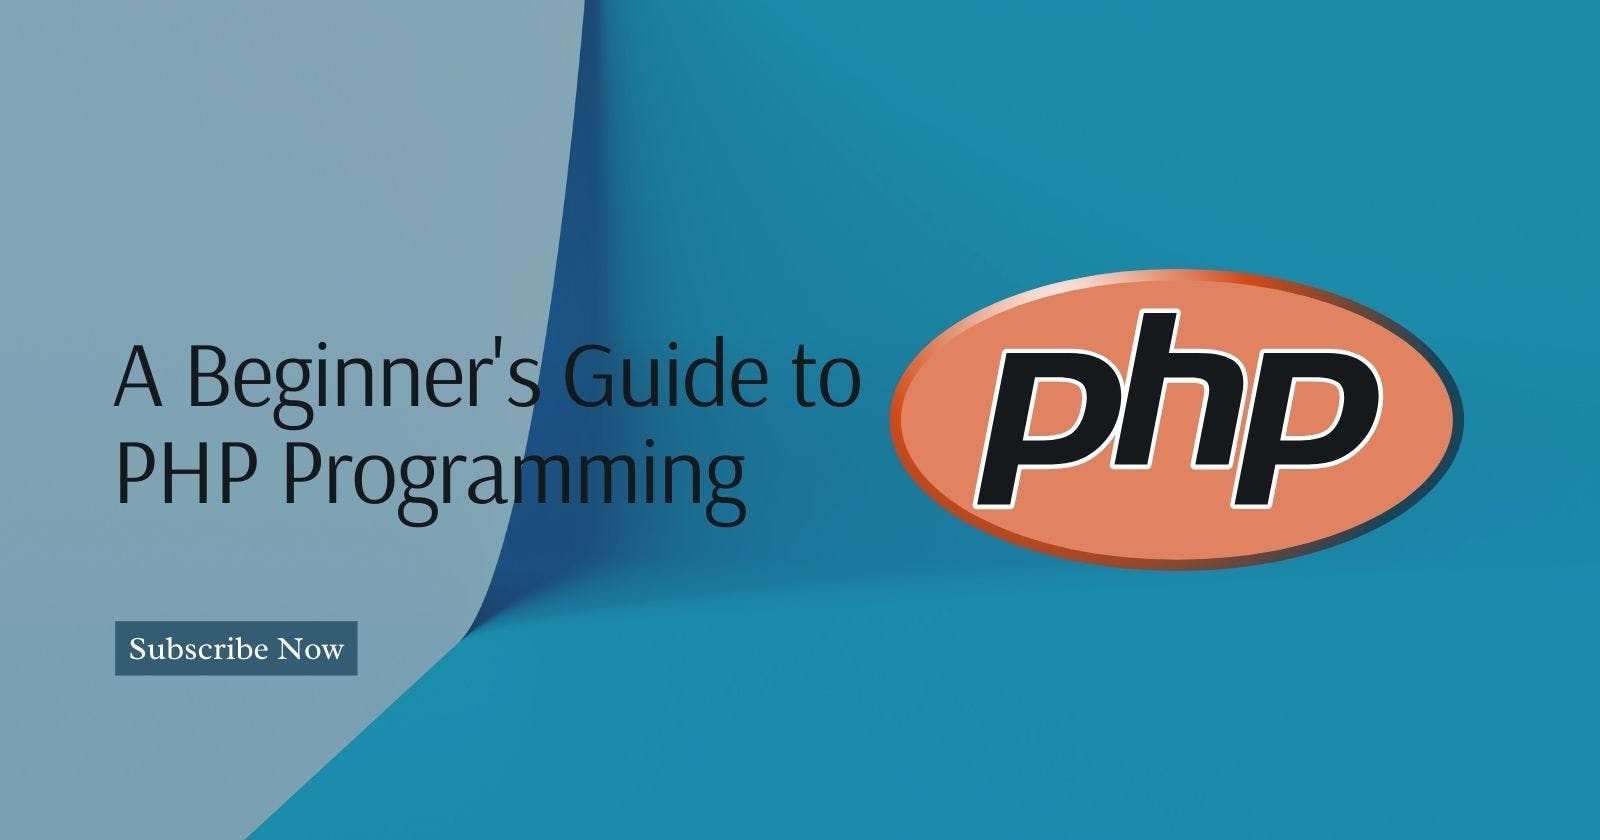 A Beginner's Guide to PHP Programming